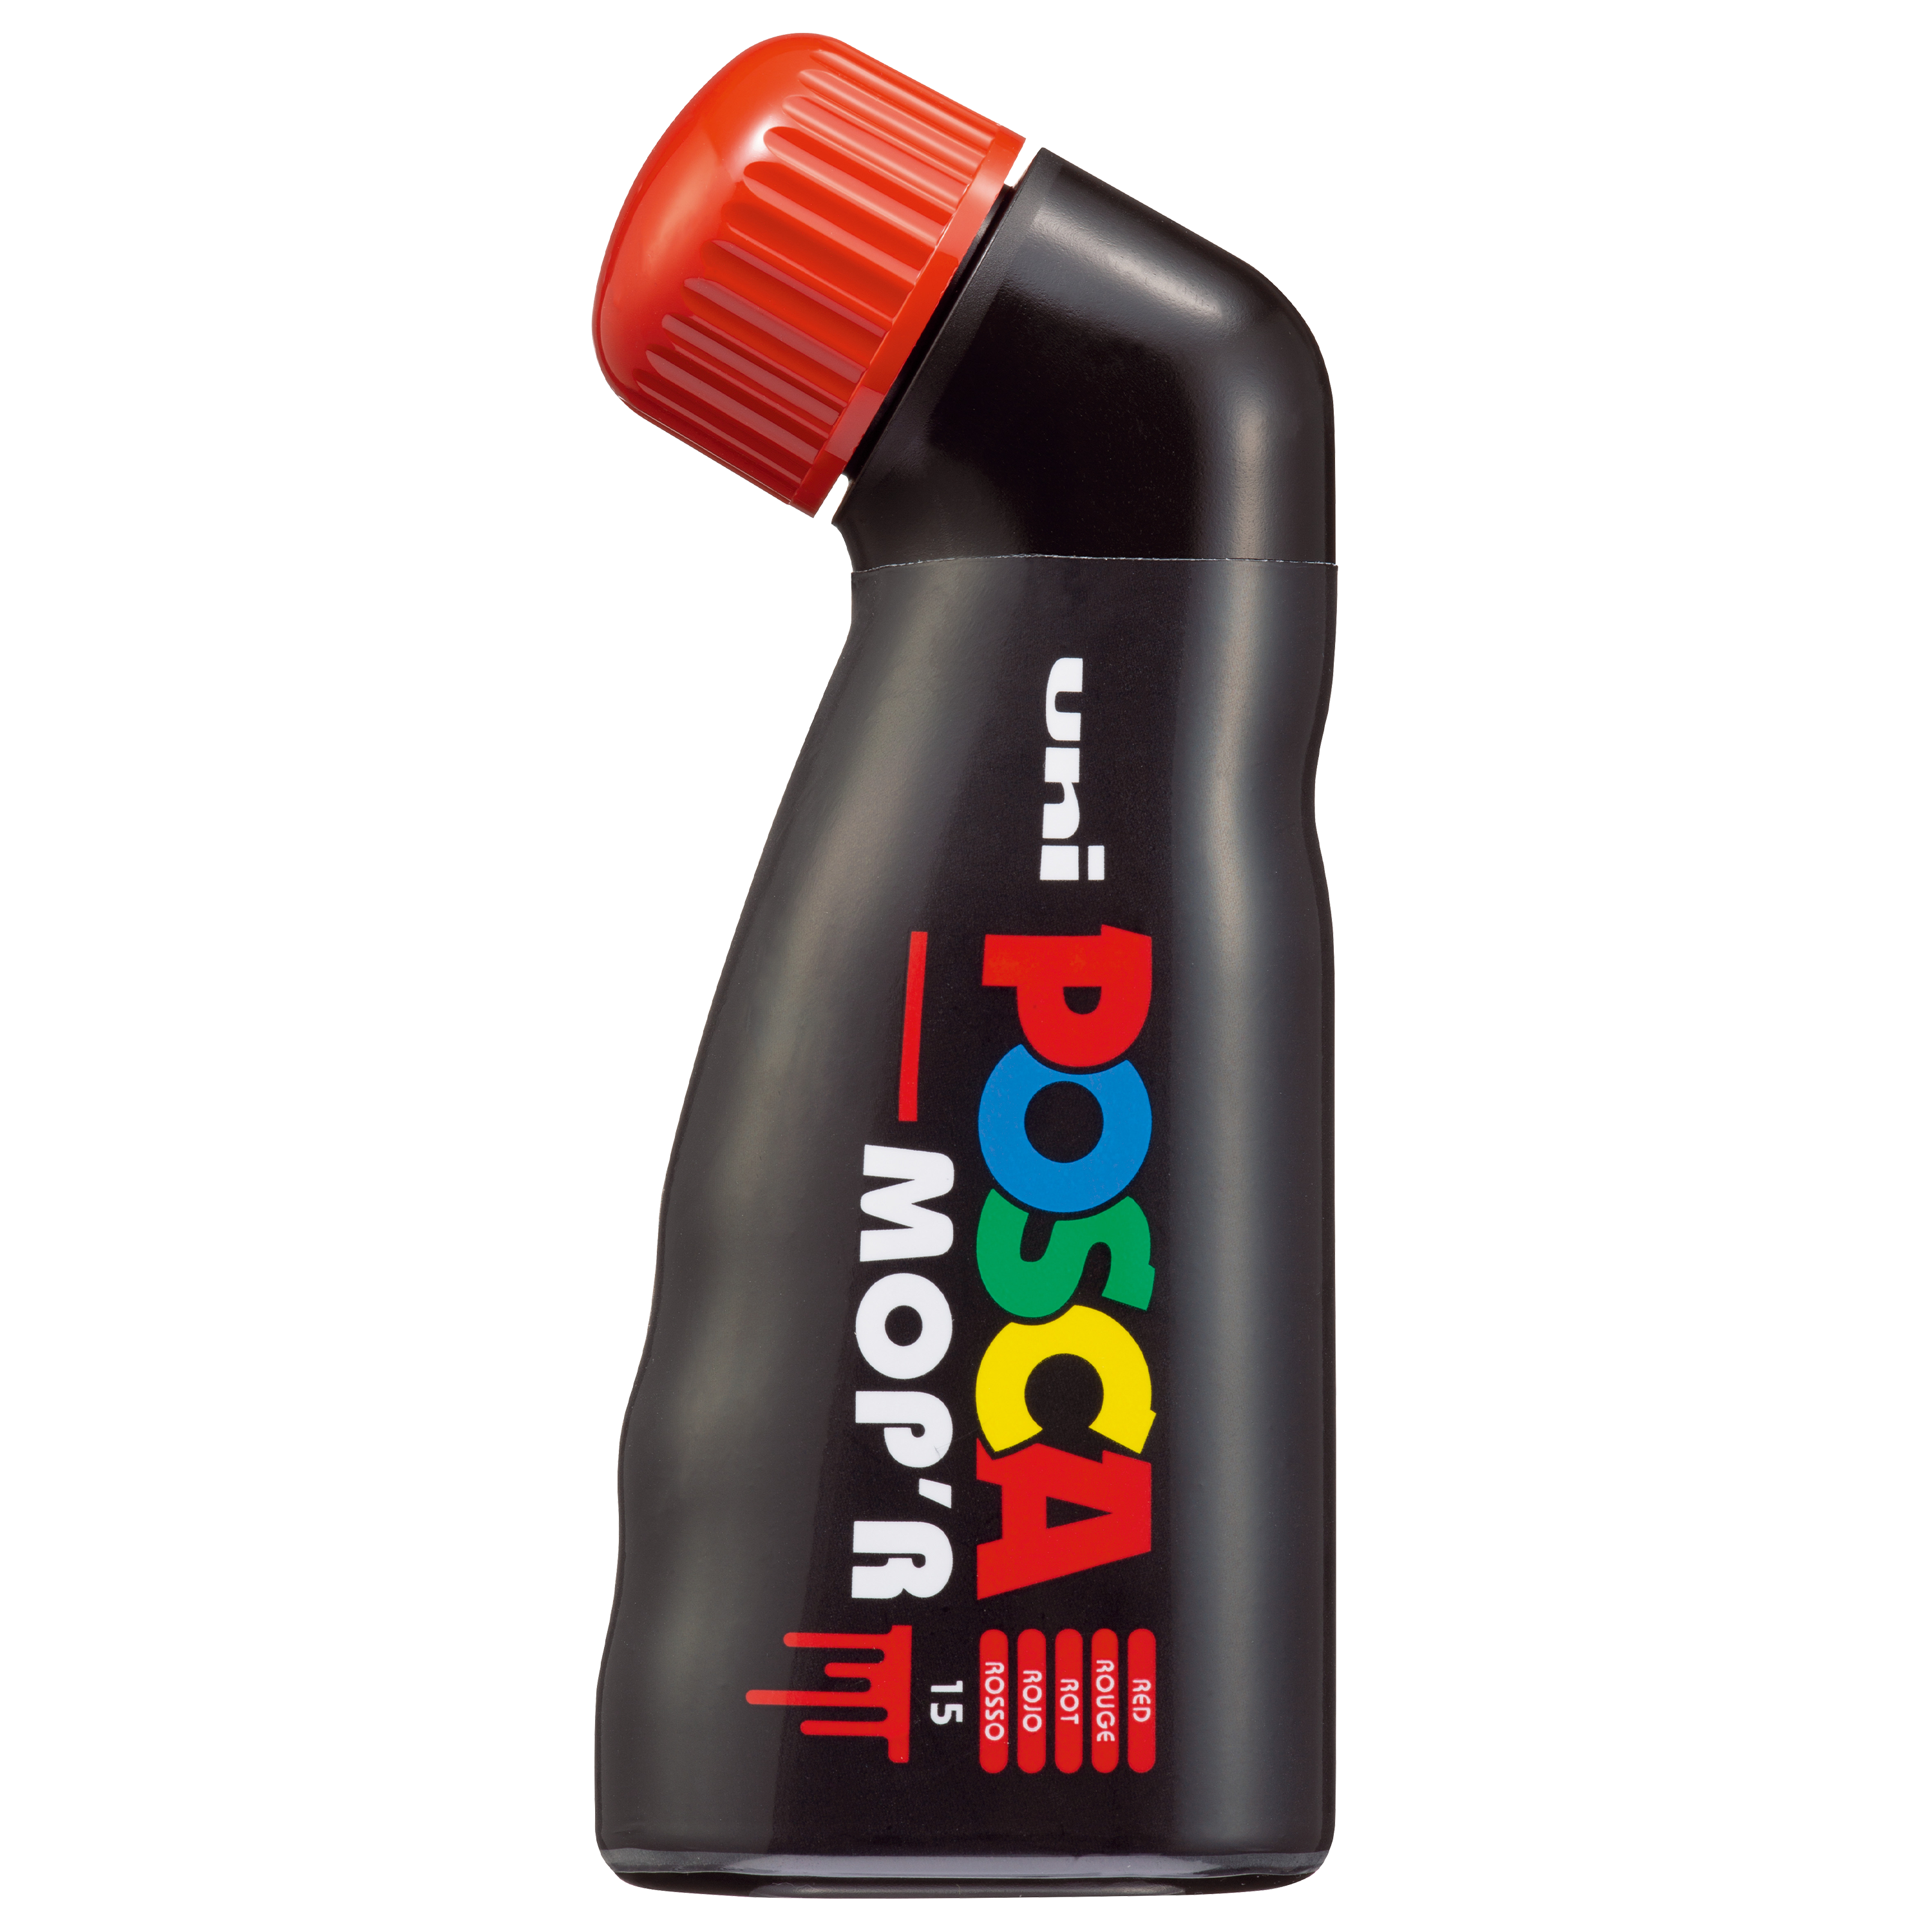 uni® POSCA MOP'R PCM-22, Water-Based Paint Markers